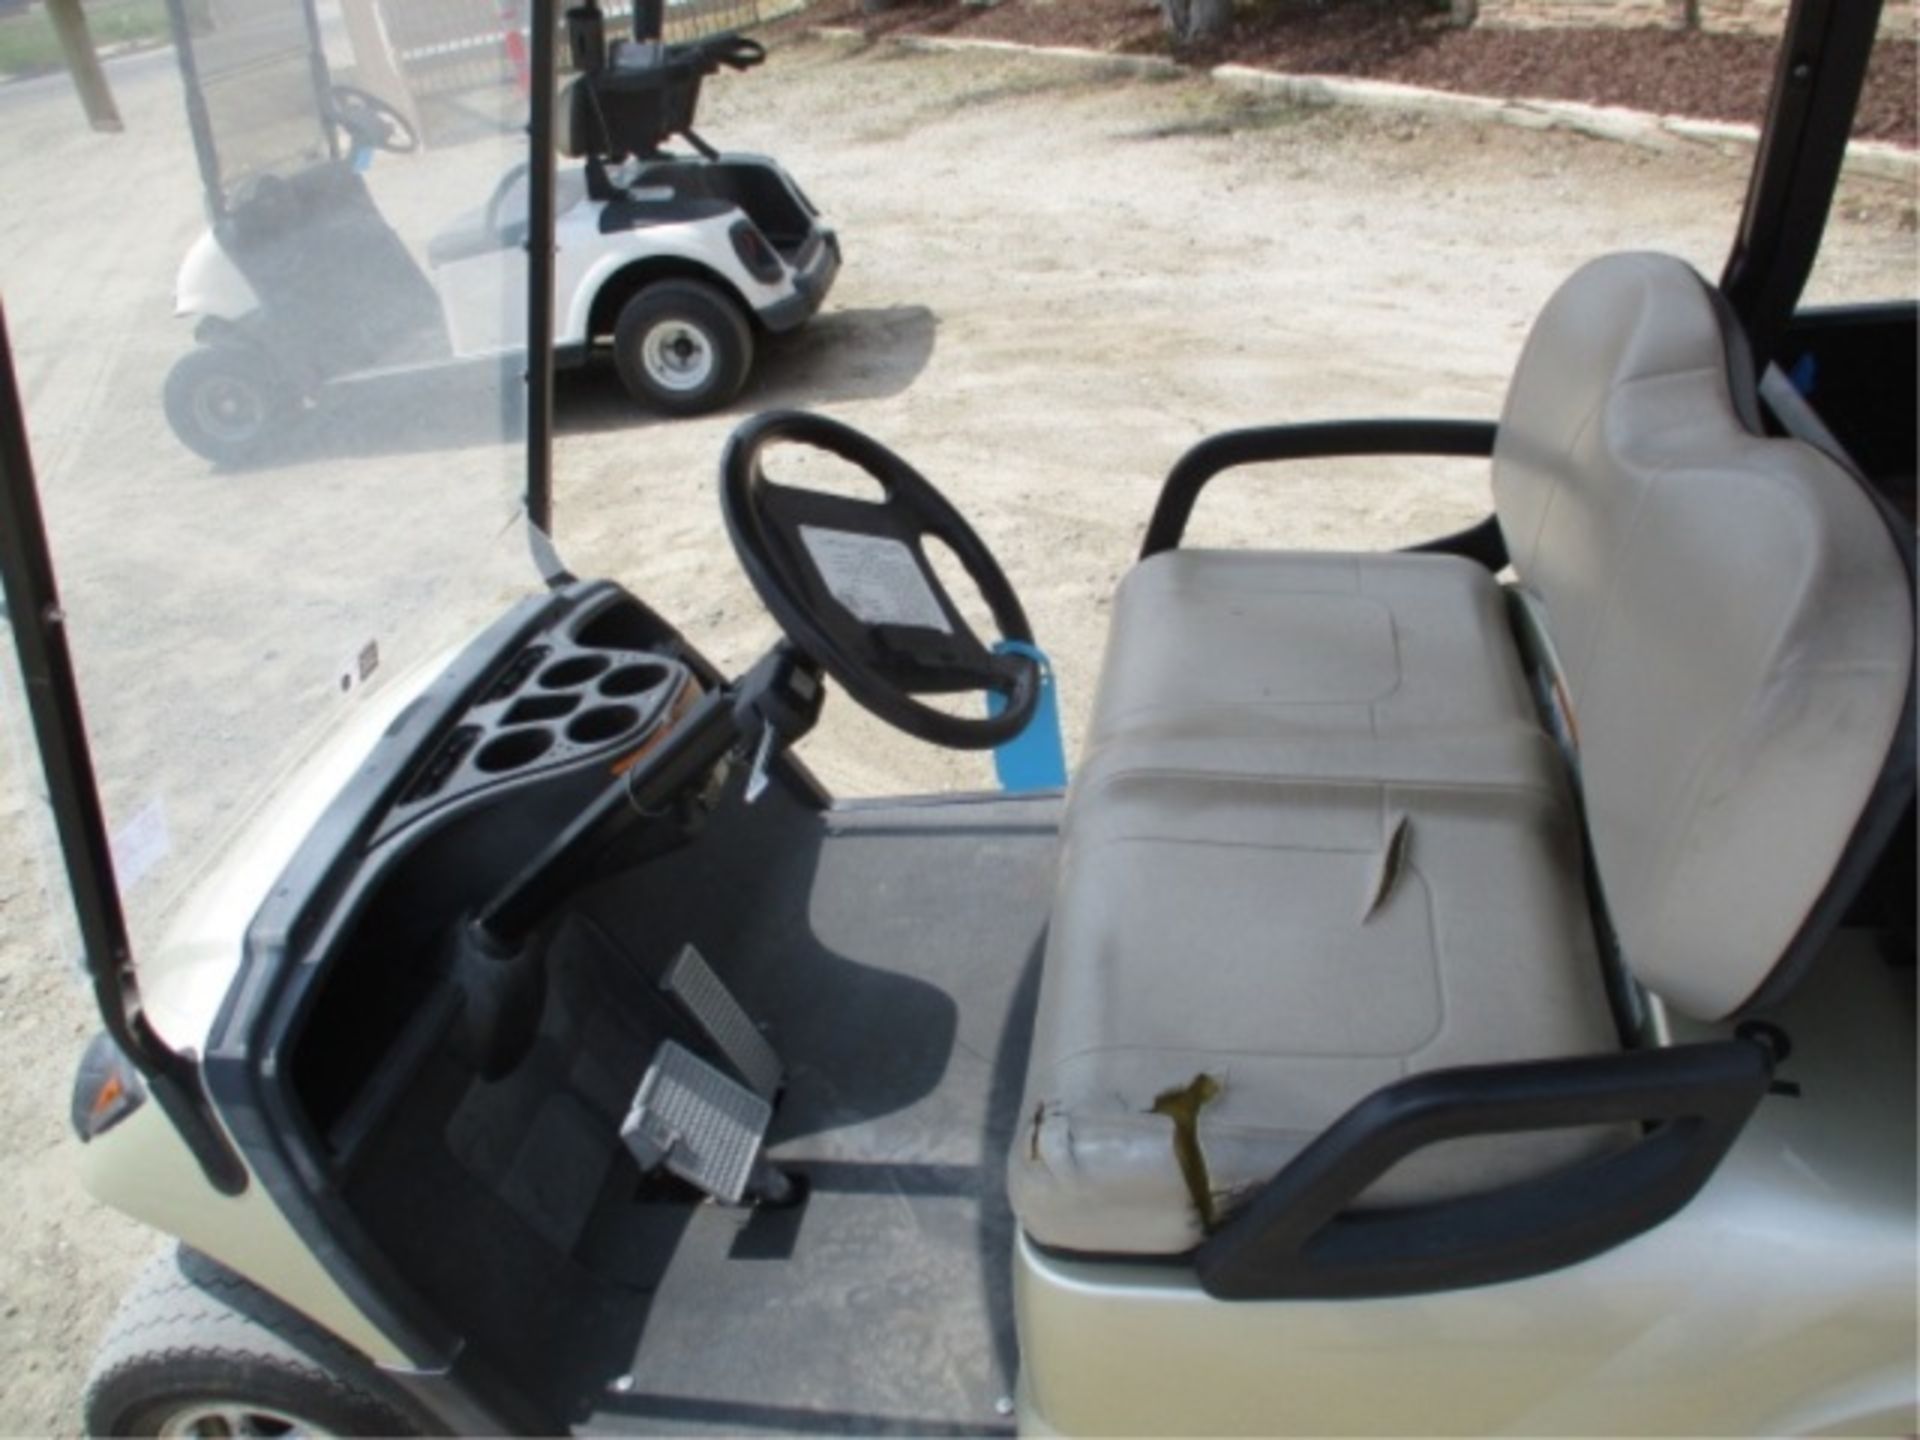 Yamaha Utility Golf Cart, Electric, Rear Metal Bed, Canopy, Includes Charger, S/N: JW1-F423610 - Image 15 of 24